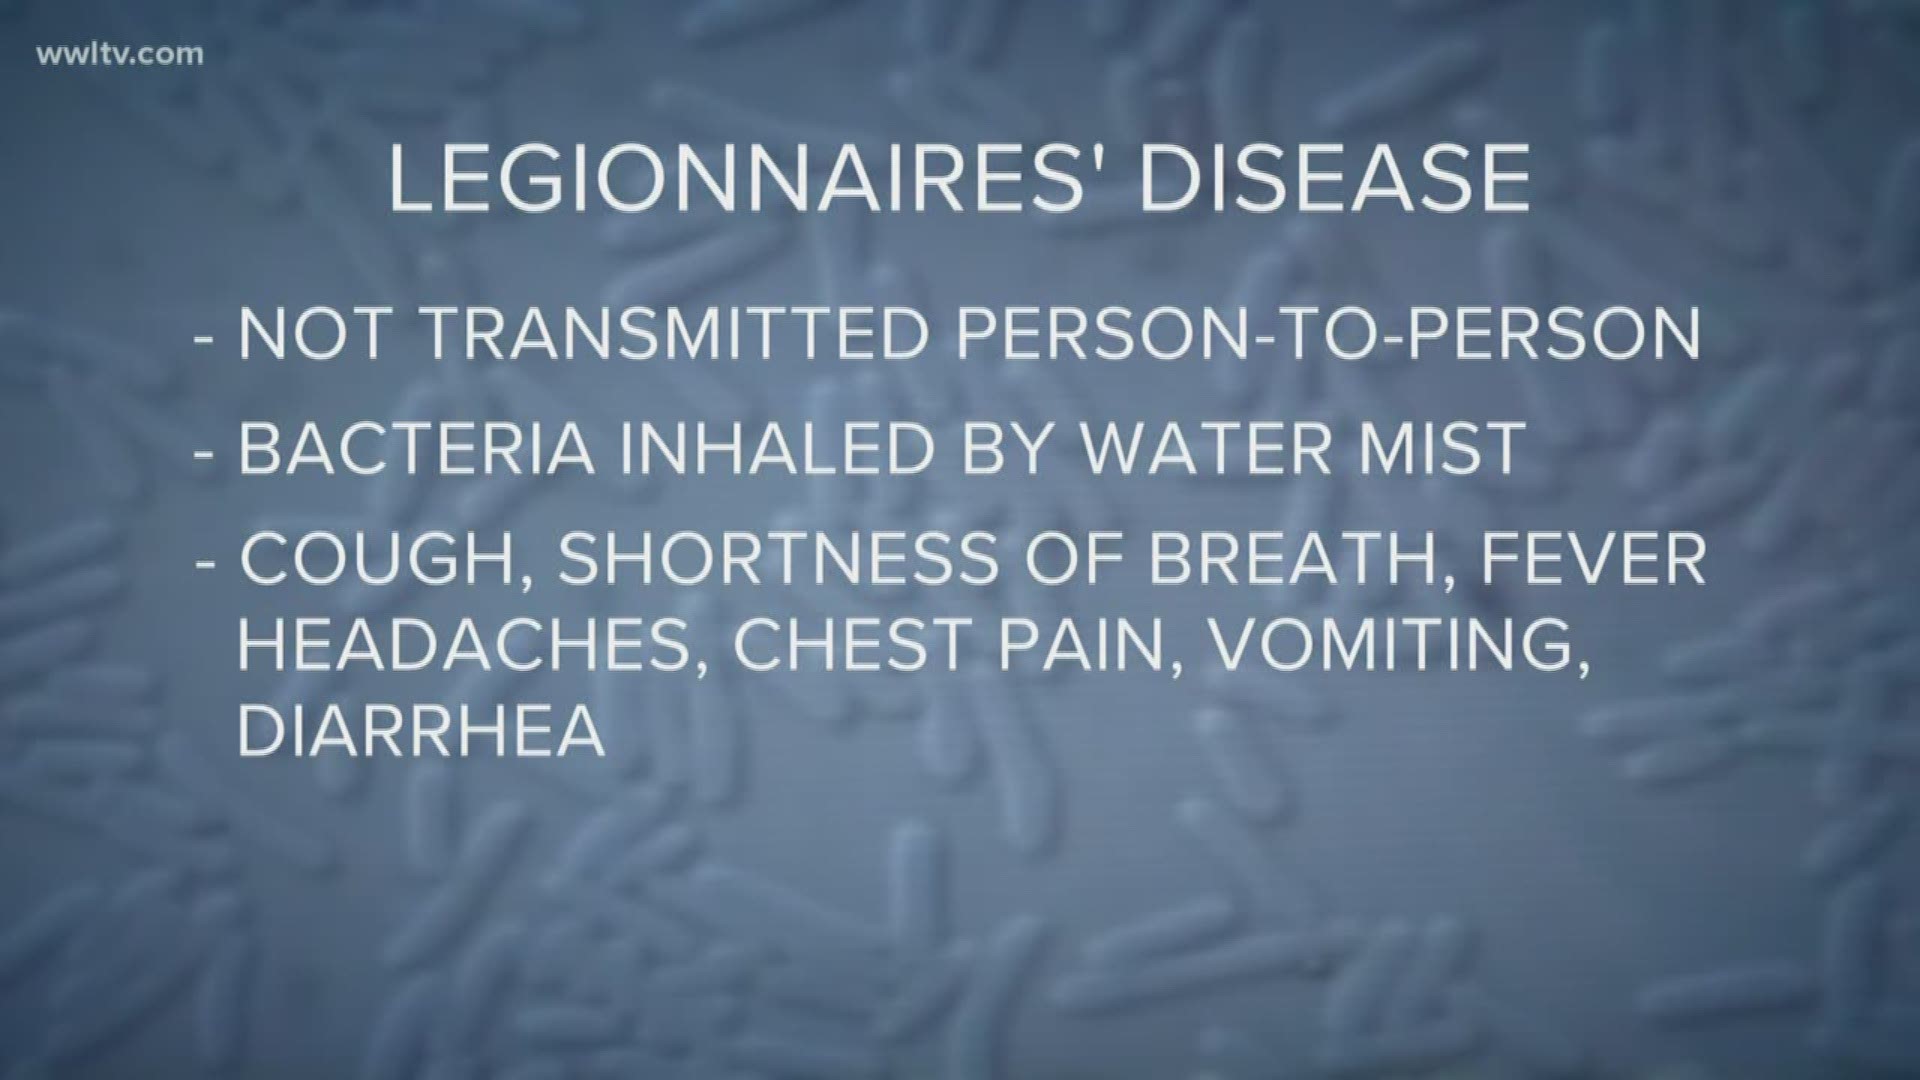 Ochsner's main campus on Jefferson Highway is reporting two cases of Legionnaires' disease.